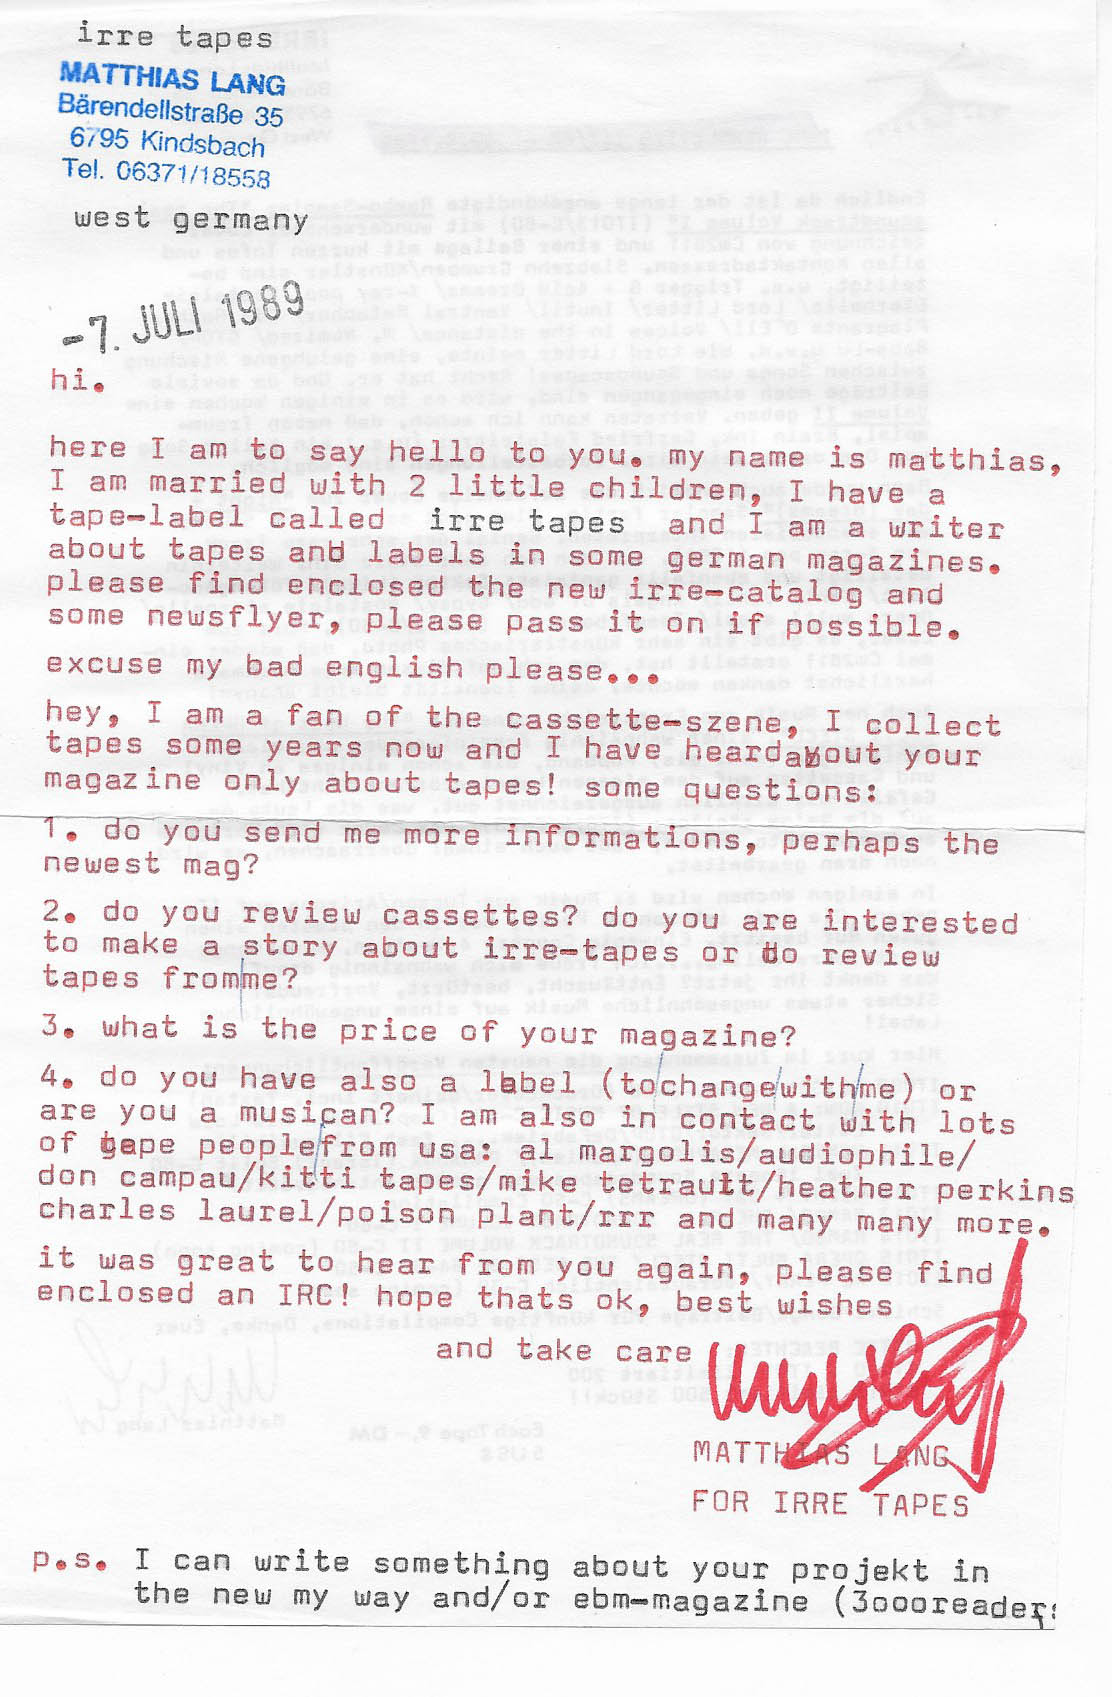 1989 Letter From Matthias Lang of Irre Tapes